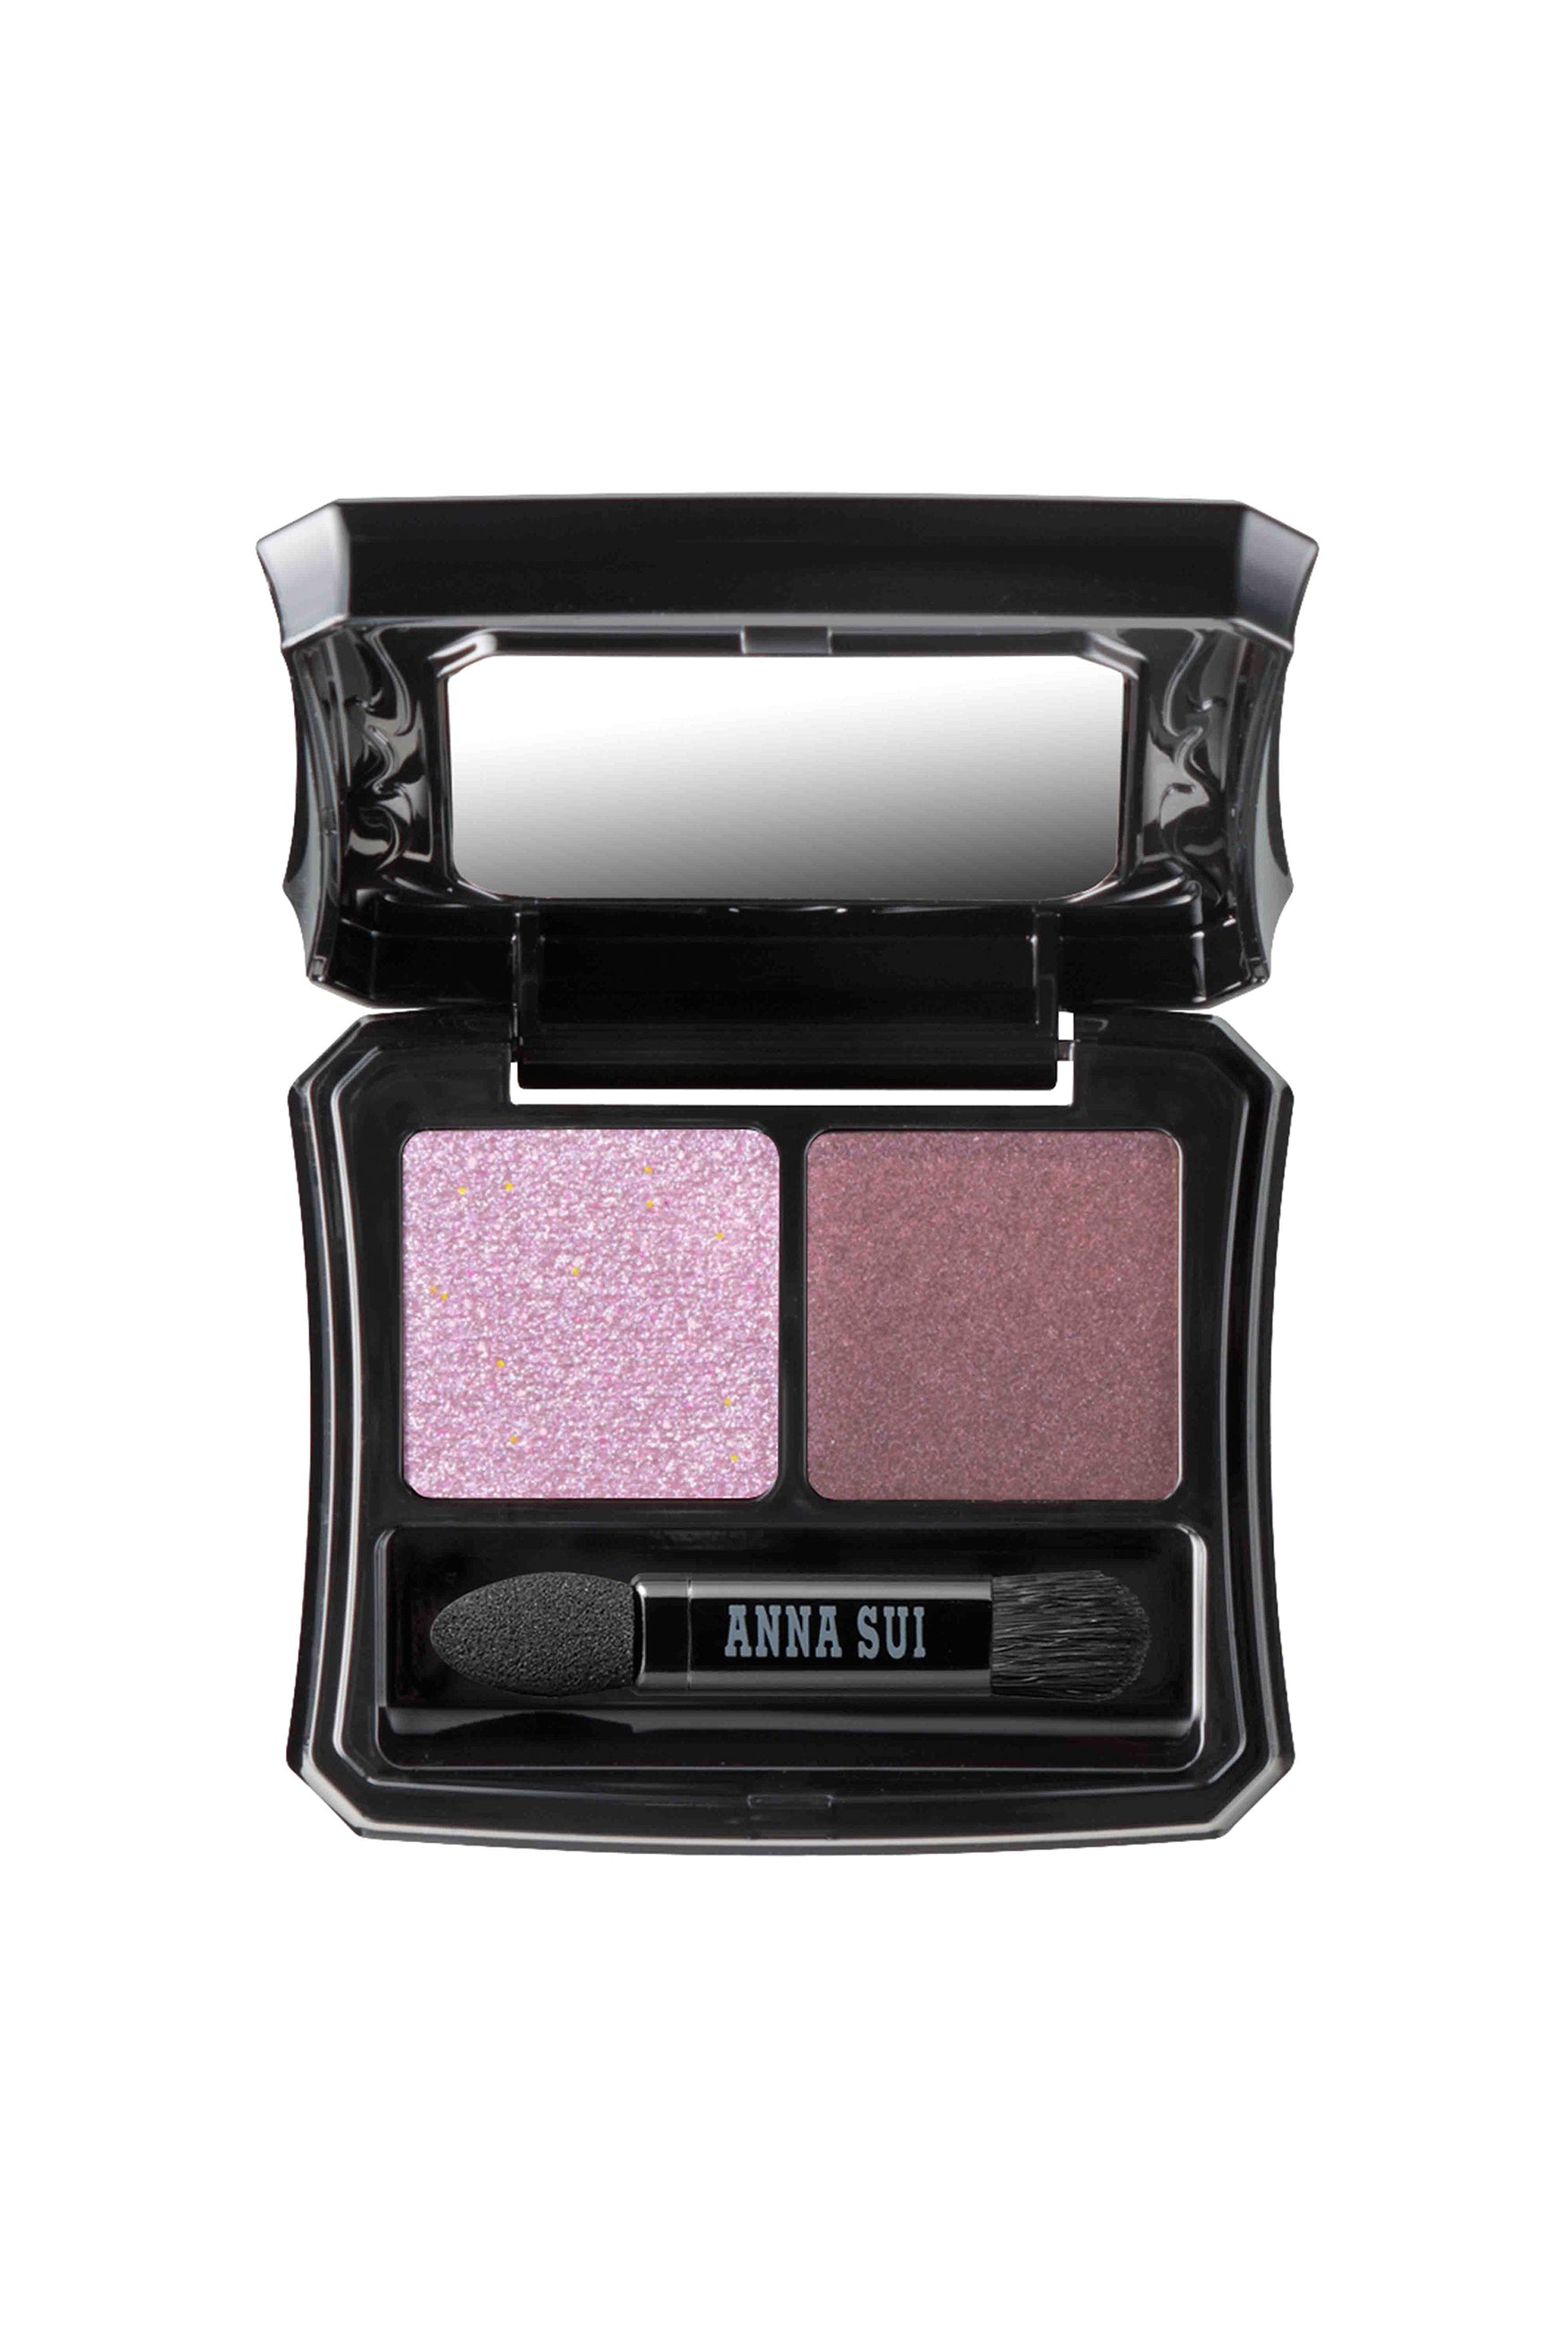 SORBET & MYSTIC in a square container with curvy sides, with Anna Sui applicator & mirror